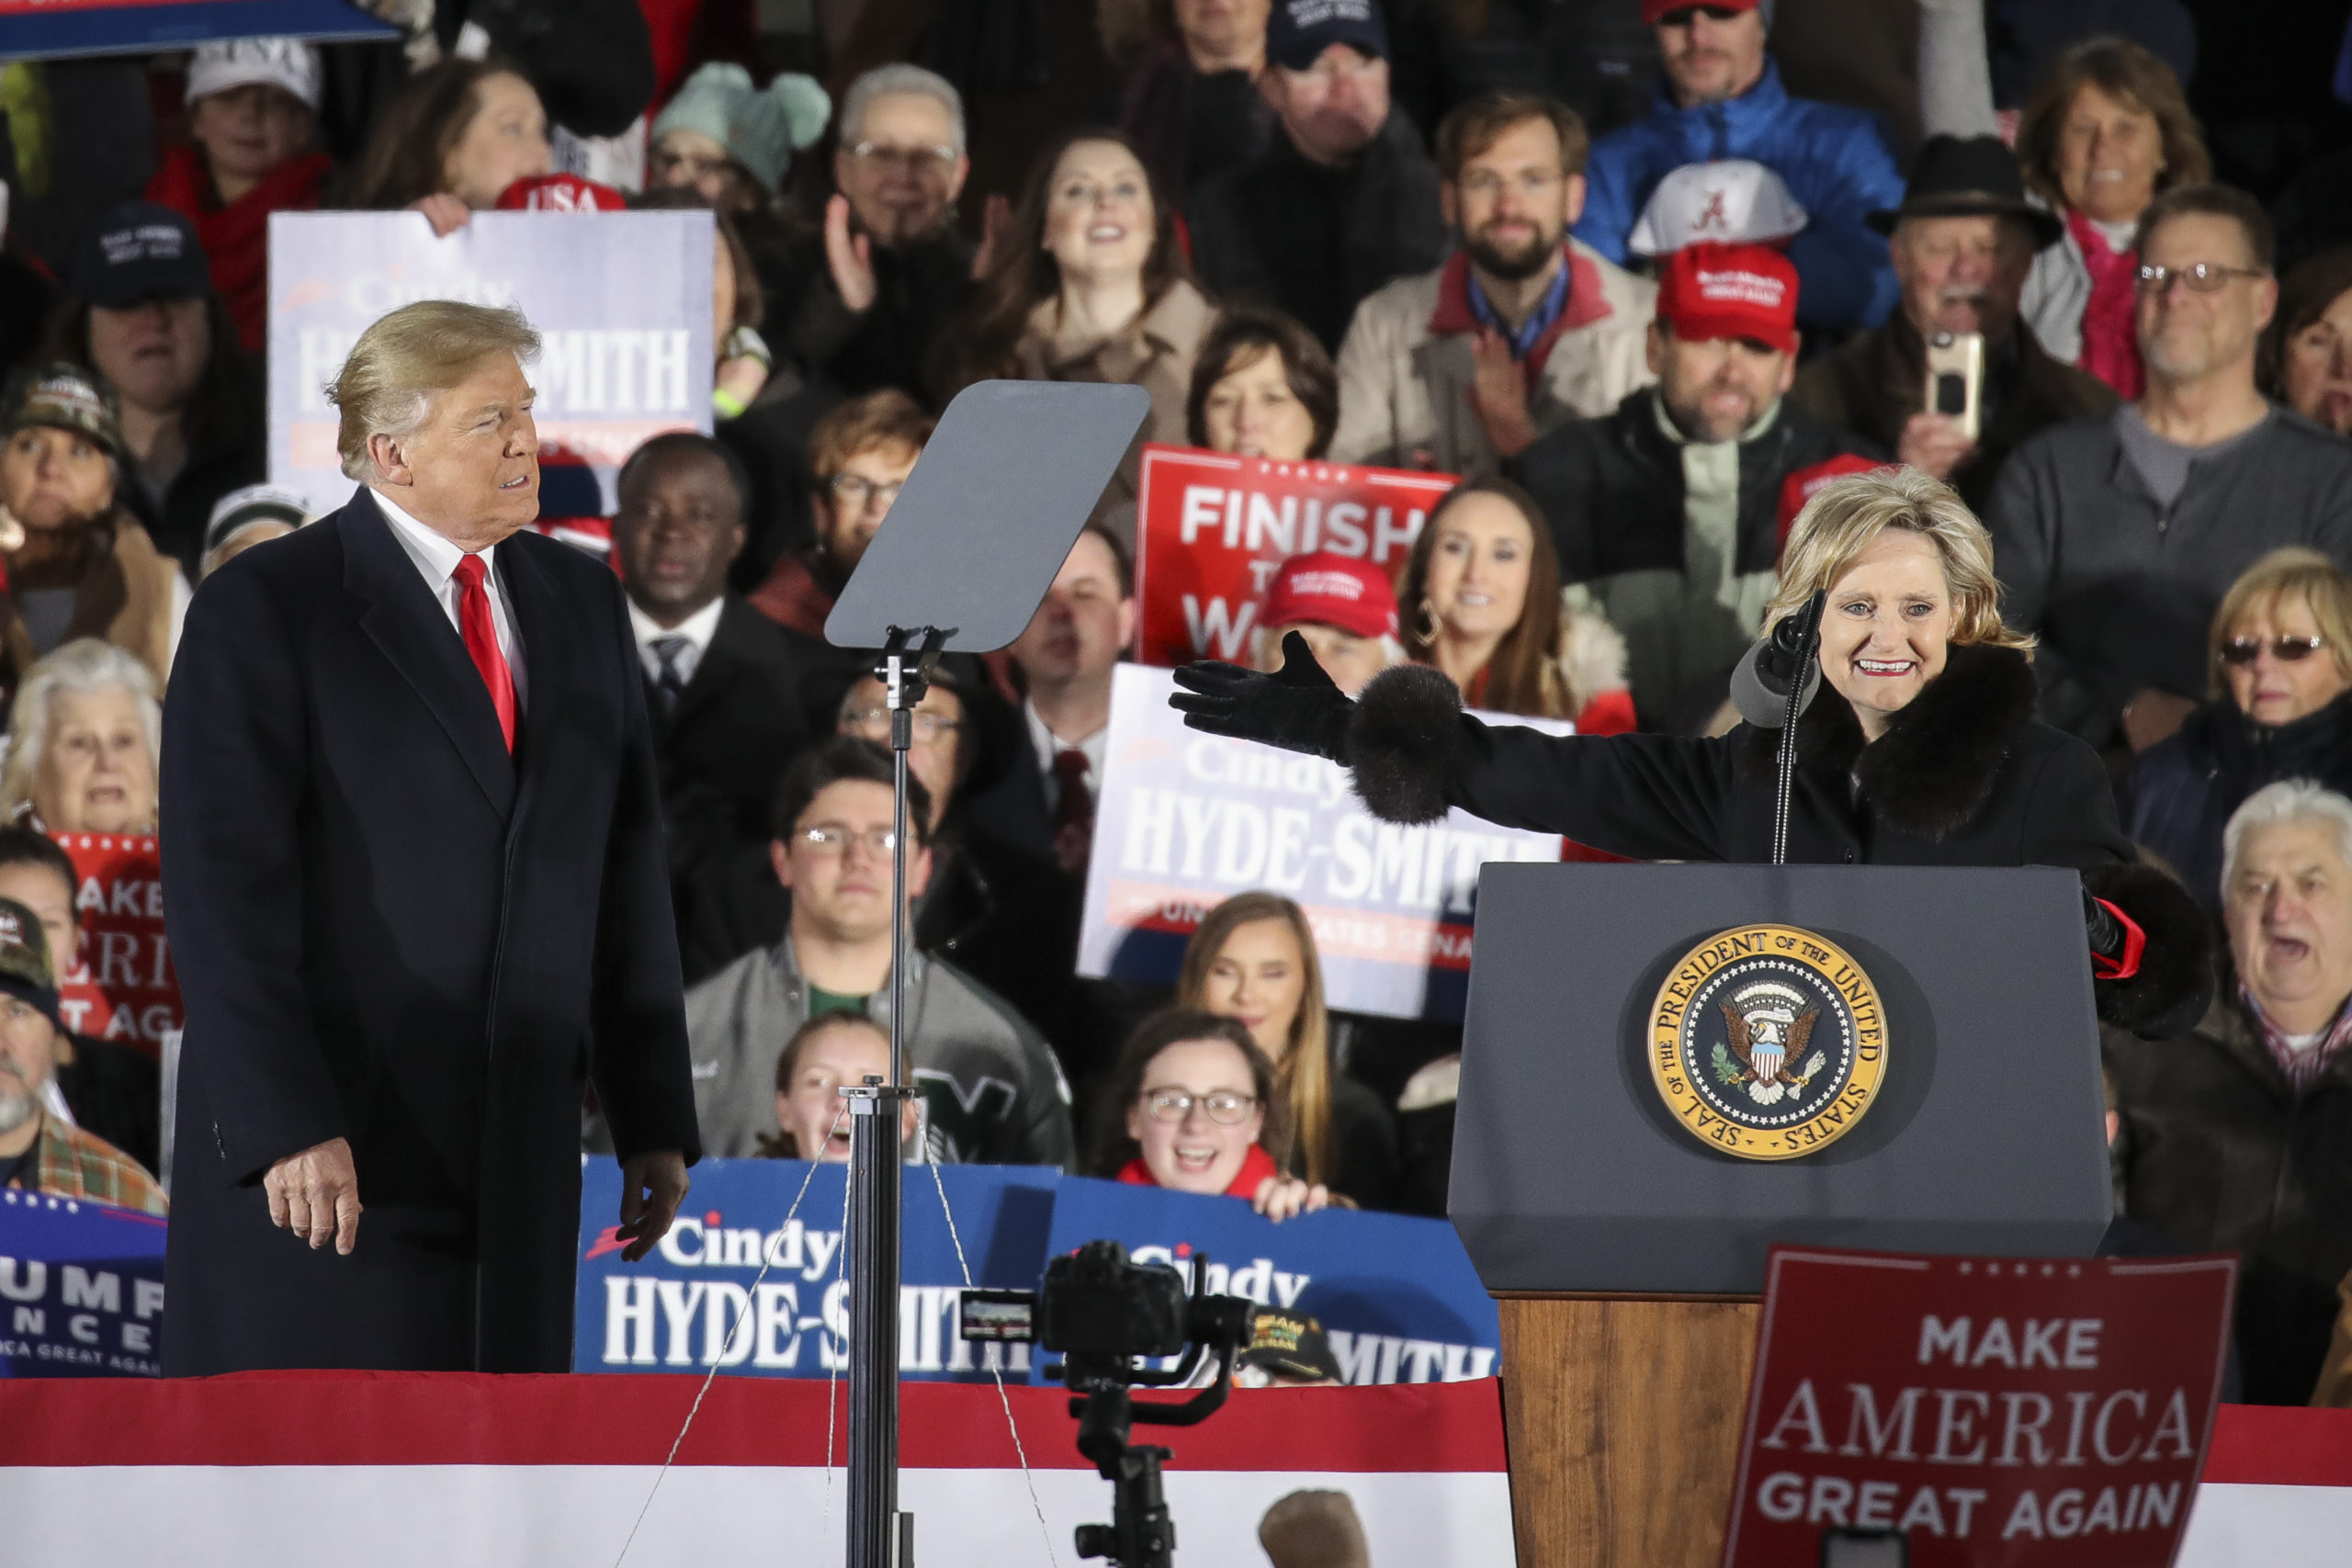 TUPELO, MS - NOVEMBER 26: (L-R) President Donald Trump looks on as Republican candidate for U.S. Senate Cindy Hyde-Smith thanks him during a rally at the Tupelo Regional Airport, November 26, 2018 in Tupelo, Mississippi. President Trump is holding two rallies on Monday in Mississippi, in support of Republican candidate for U.S. Senate Cindy Hyde-Smith. Hyde-Smith faces off against Democratic candidate Mike Espy in a runoff election on Tuesday. (Photo by Drew Angerer/Getty Images)